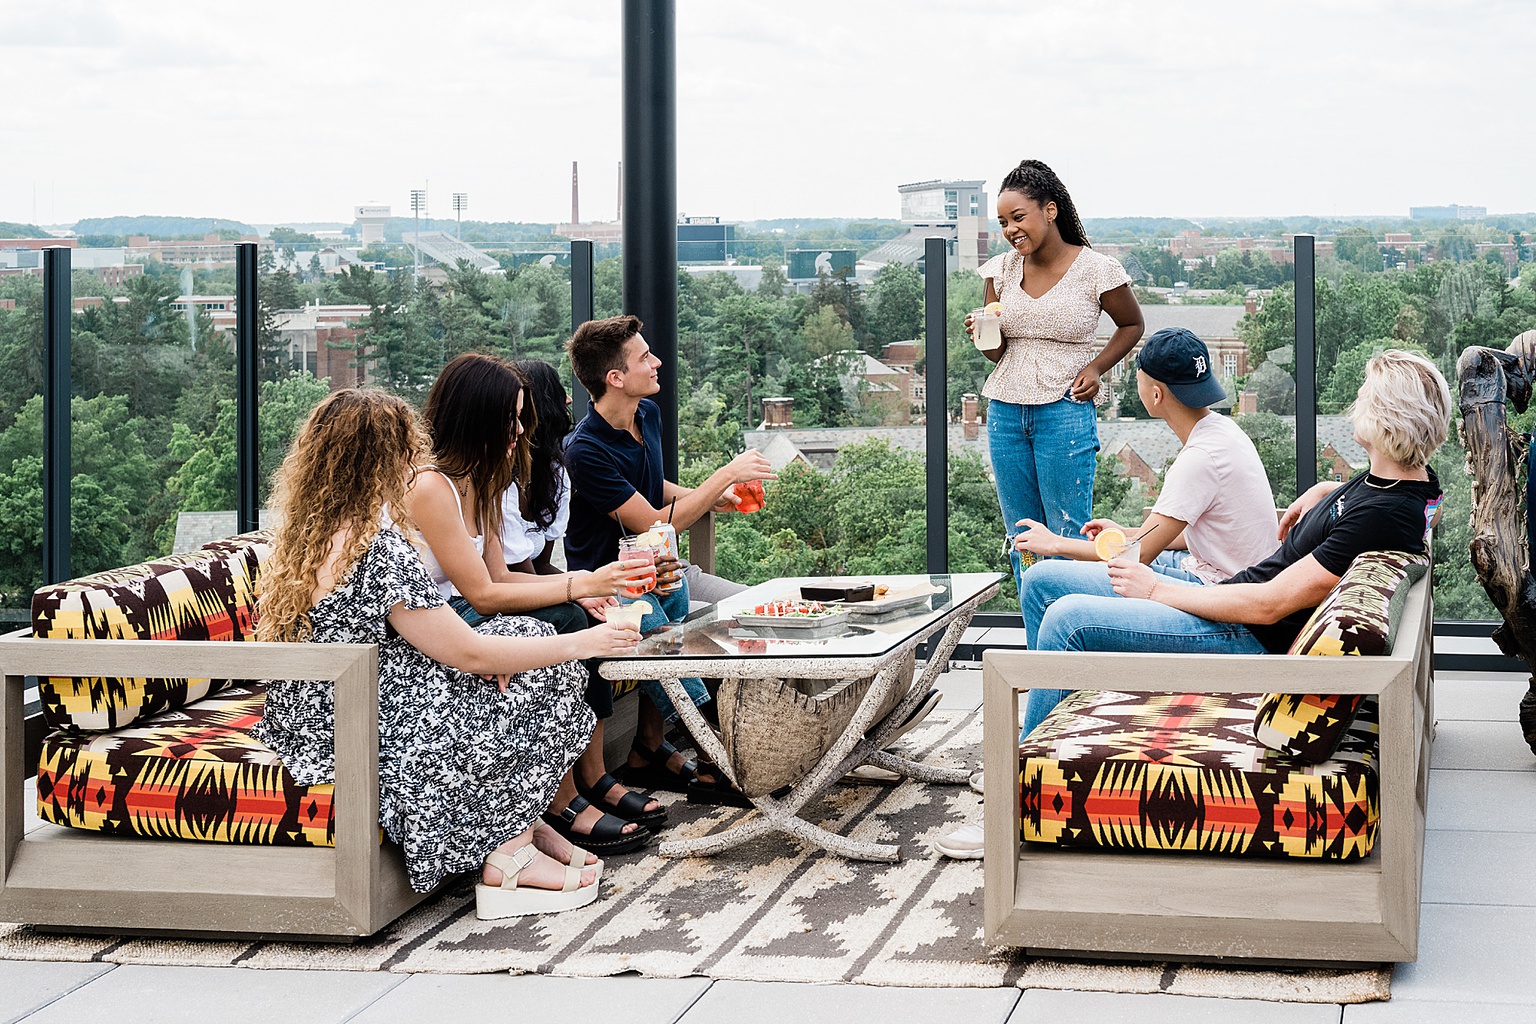 Graduate Rock bar commercial photography showing the rooftop bar with college students enjoying drinks together, overlooking Spartan Stadium and the Michigan State campus, by Allie Siarto & Co. Photography, Lansing, Michigan commercial photographers